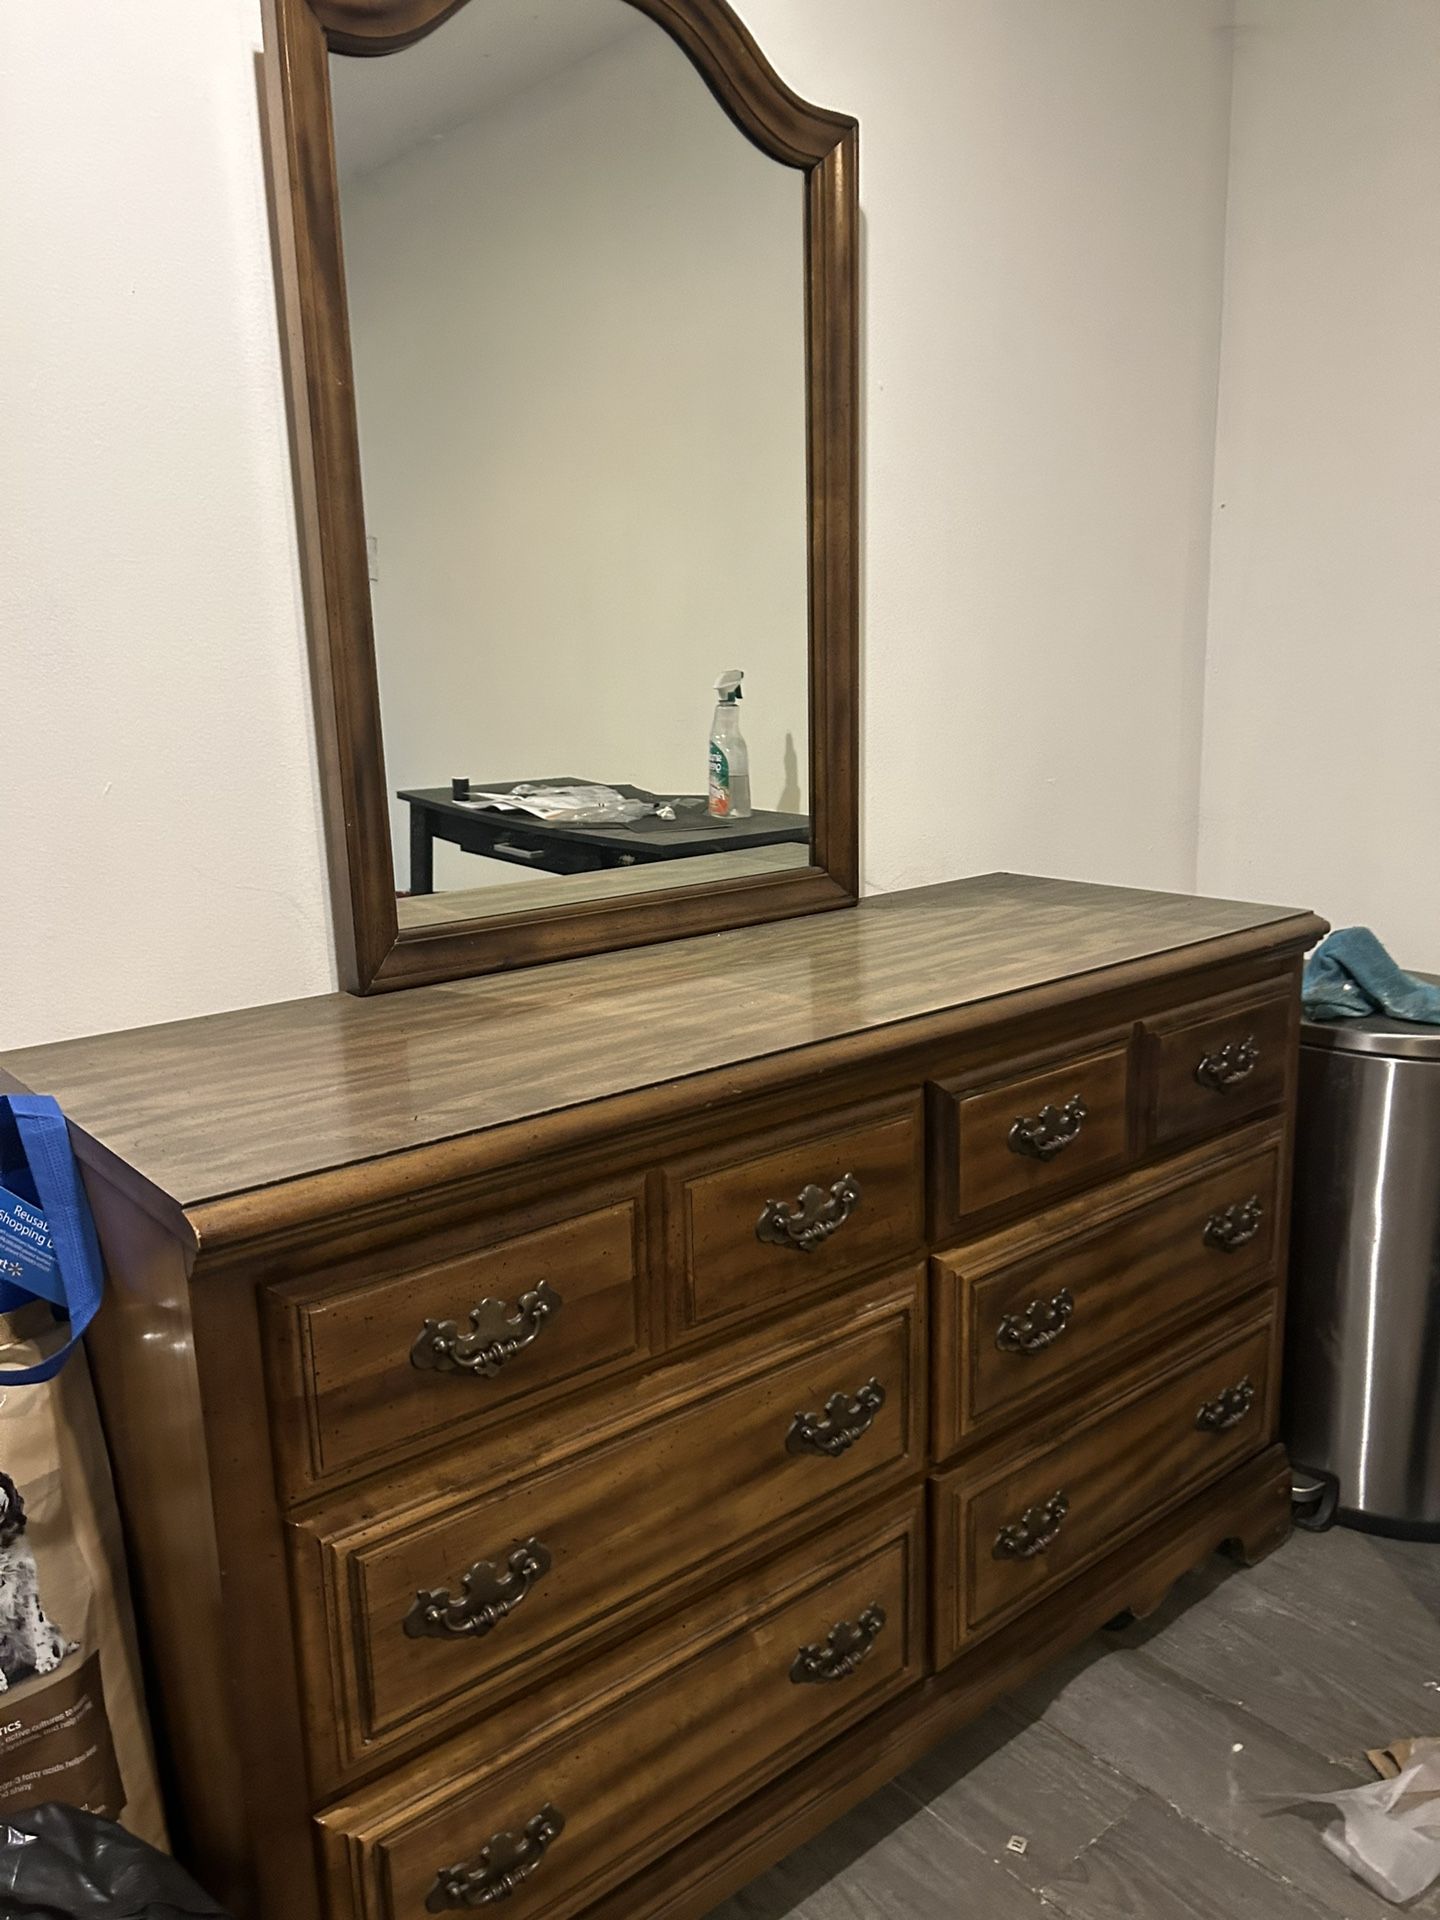 DRESSER, MIRROR AND SIDE TABLE TOGETHER $200